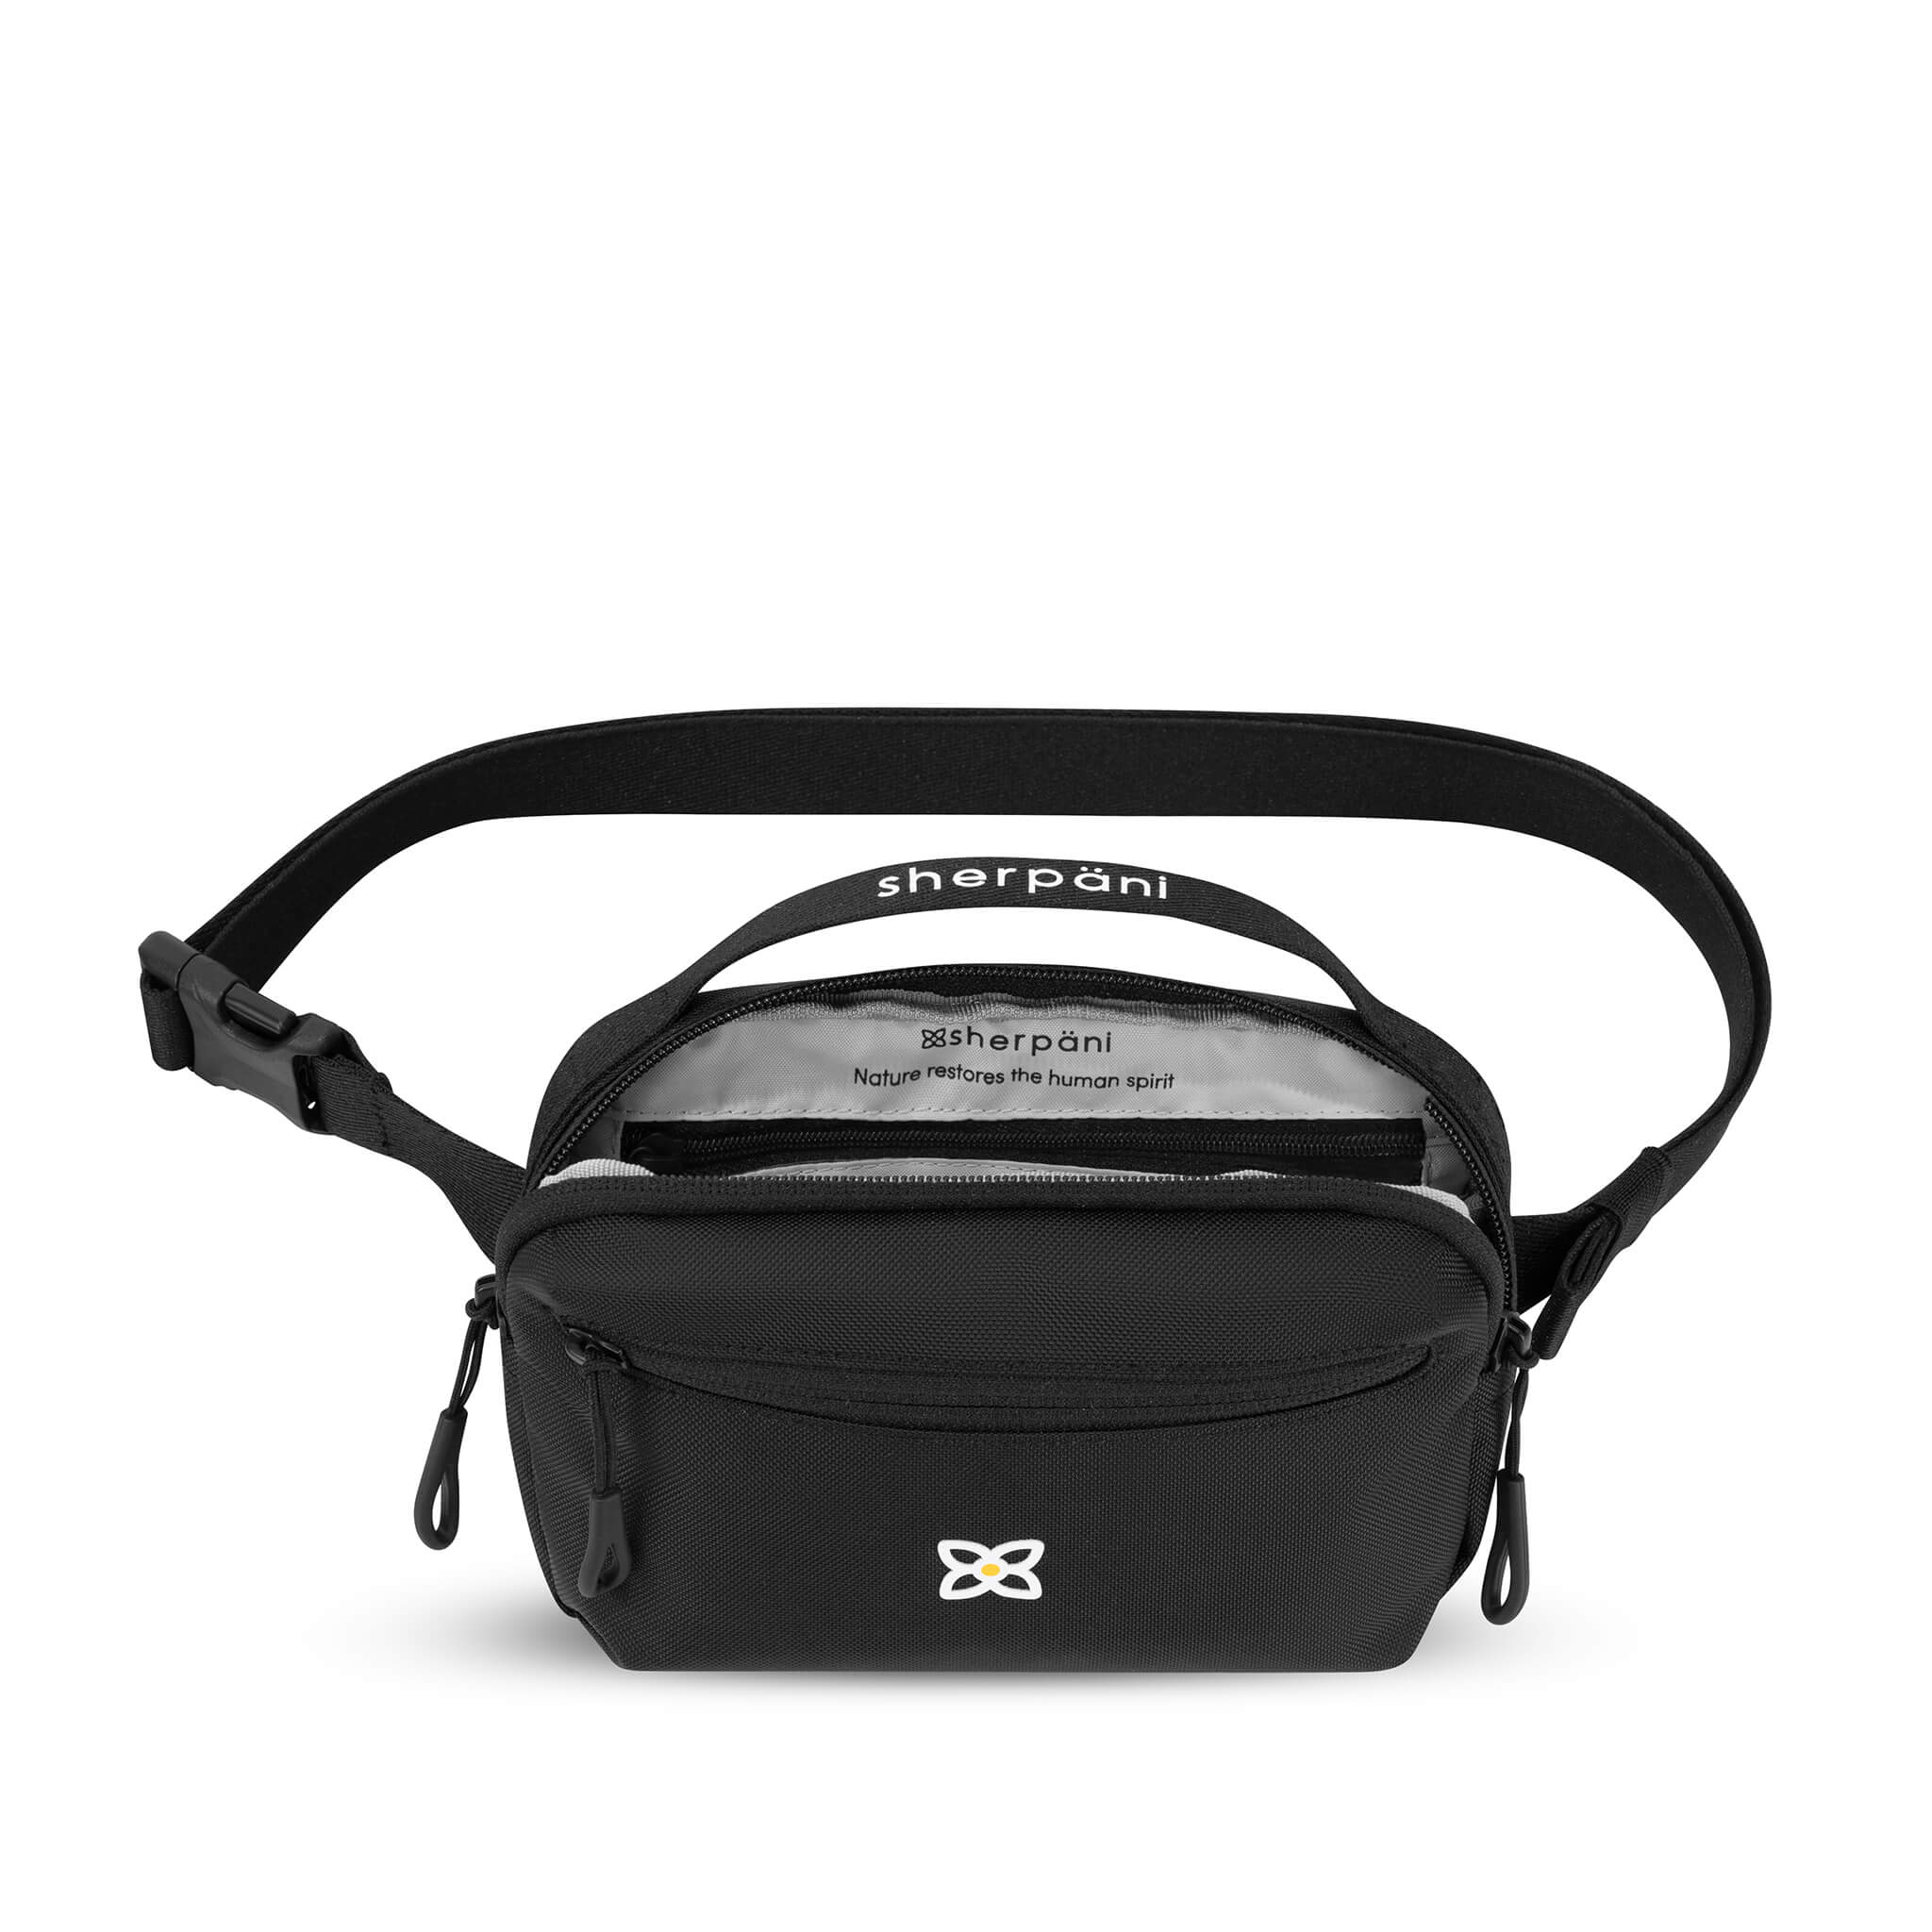 Top view of Sherpani's waist pack, the Hyk in Raven. The main bag compartment is open to reveal a light gray interior and inside zipper pocket. 